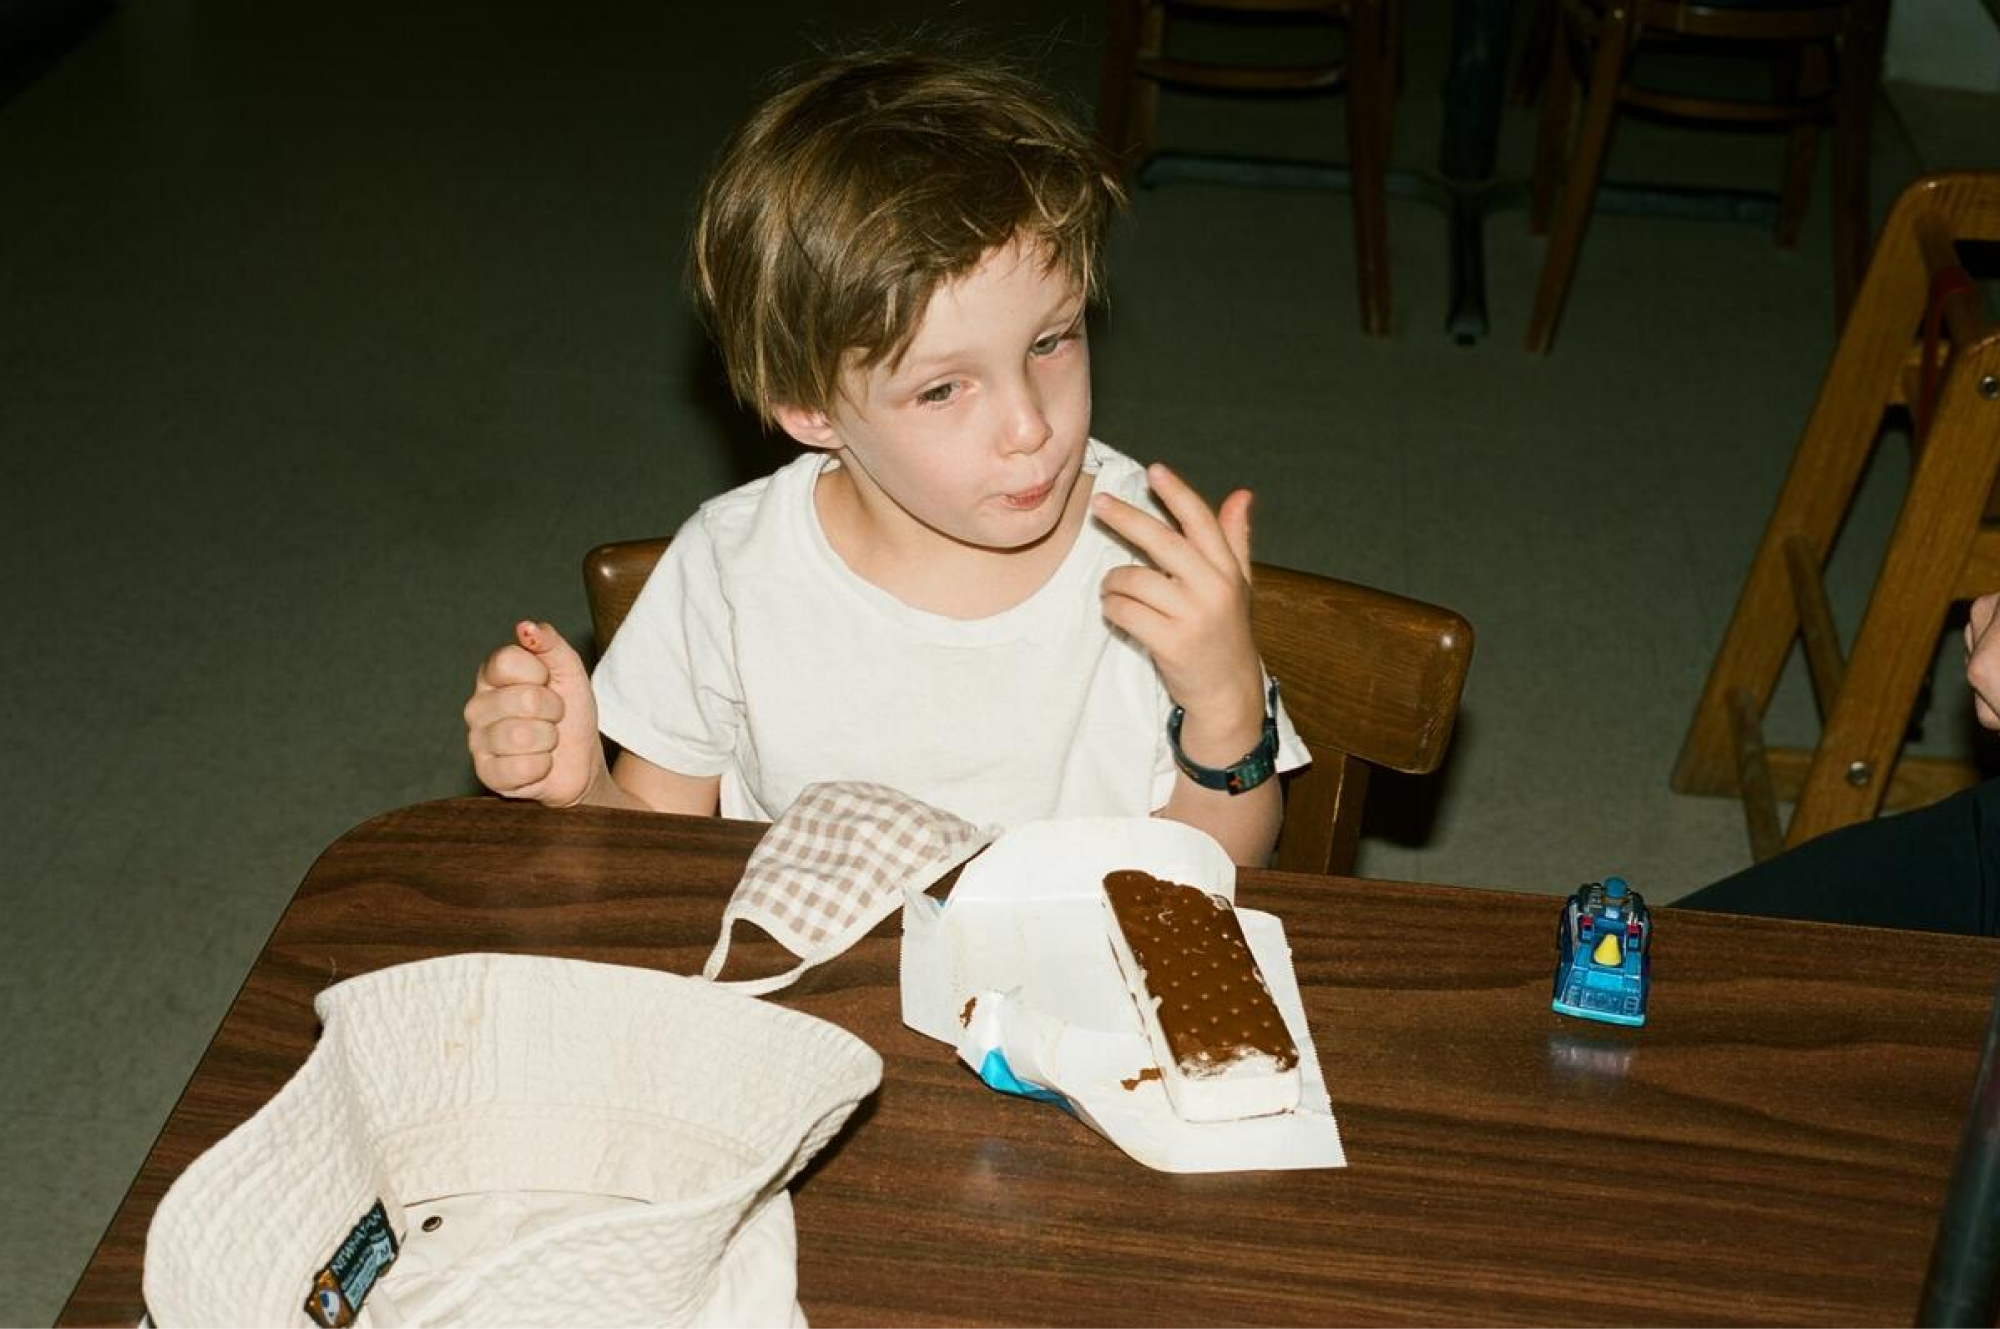 A boy sits and licks his fingers with an ice cream sandwich on the table in front of him.